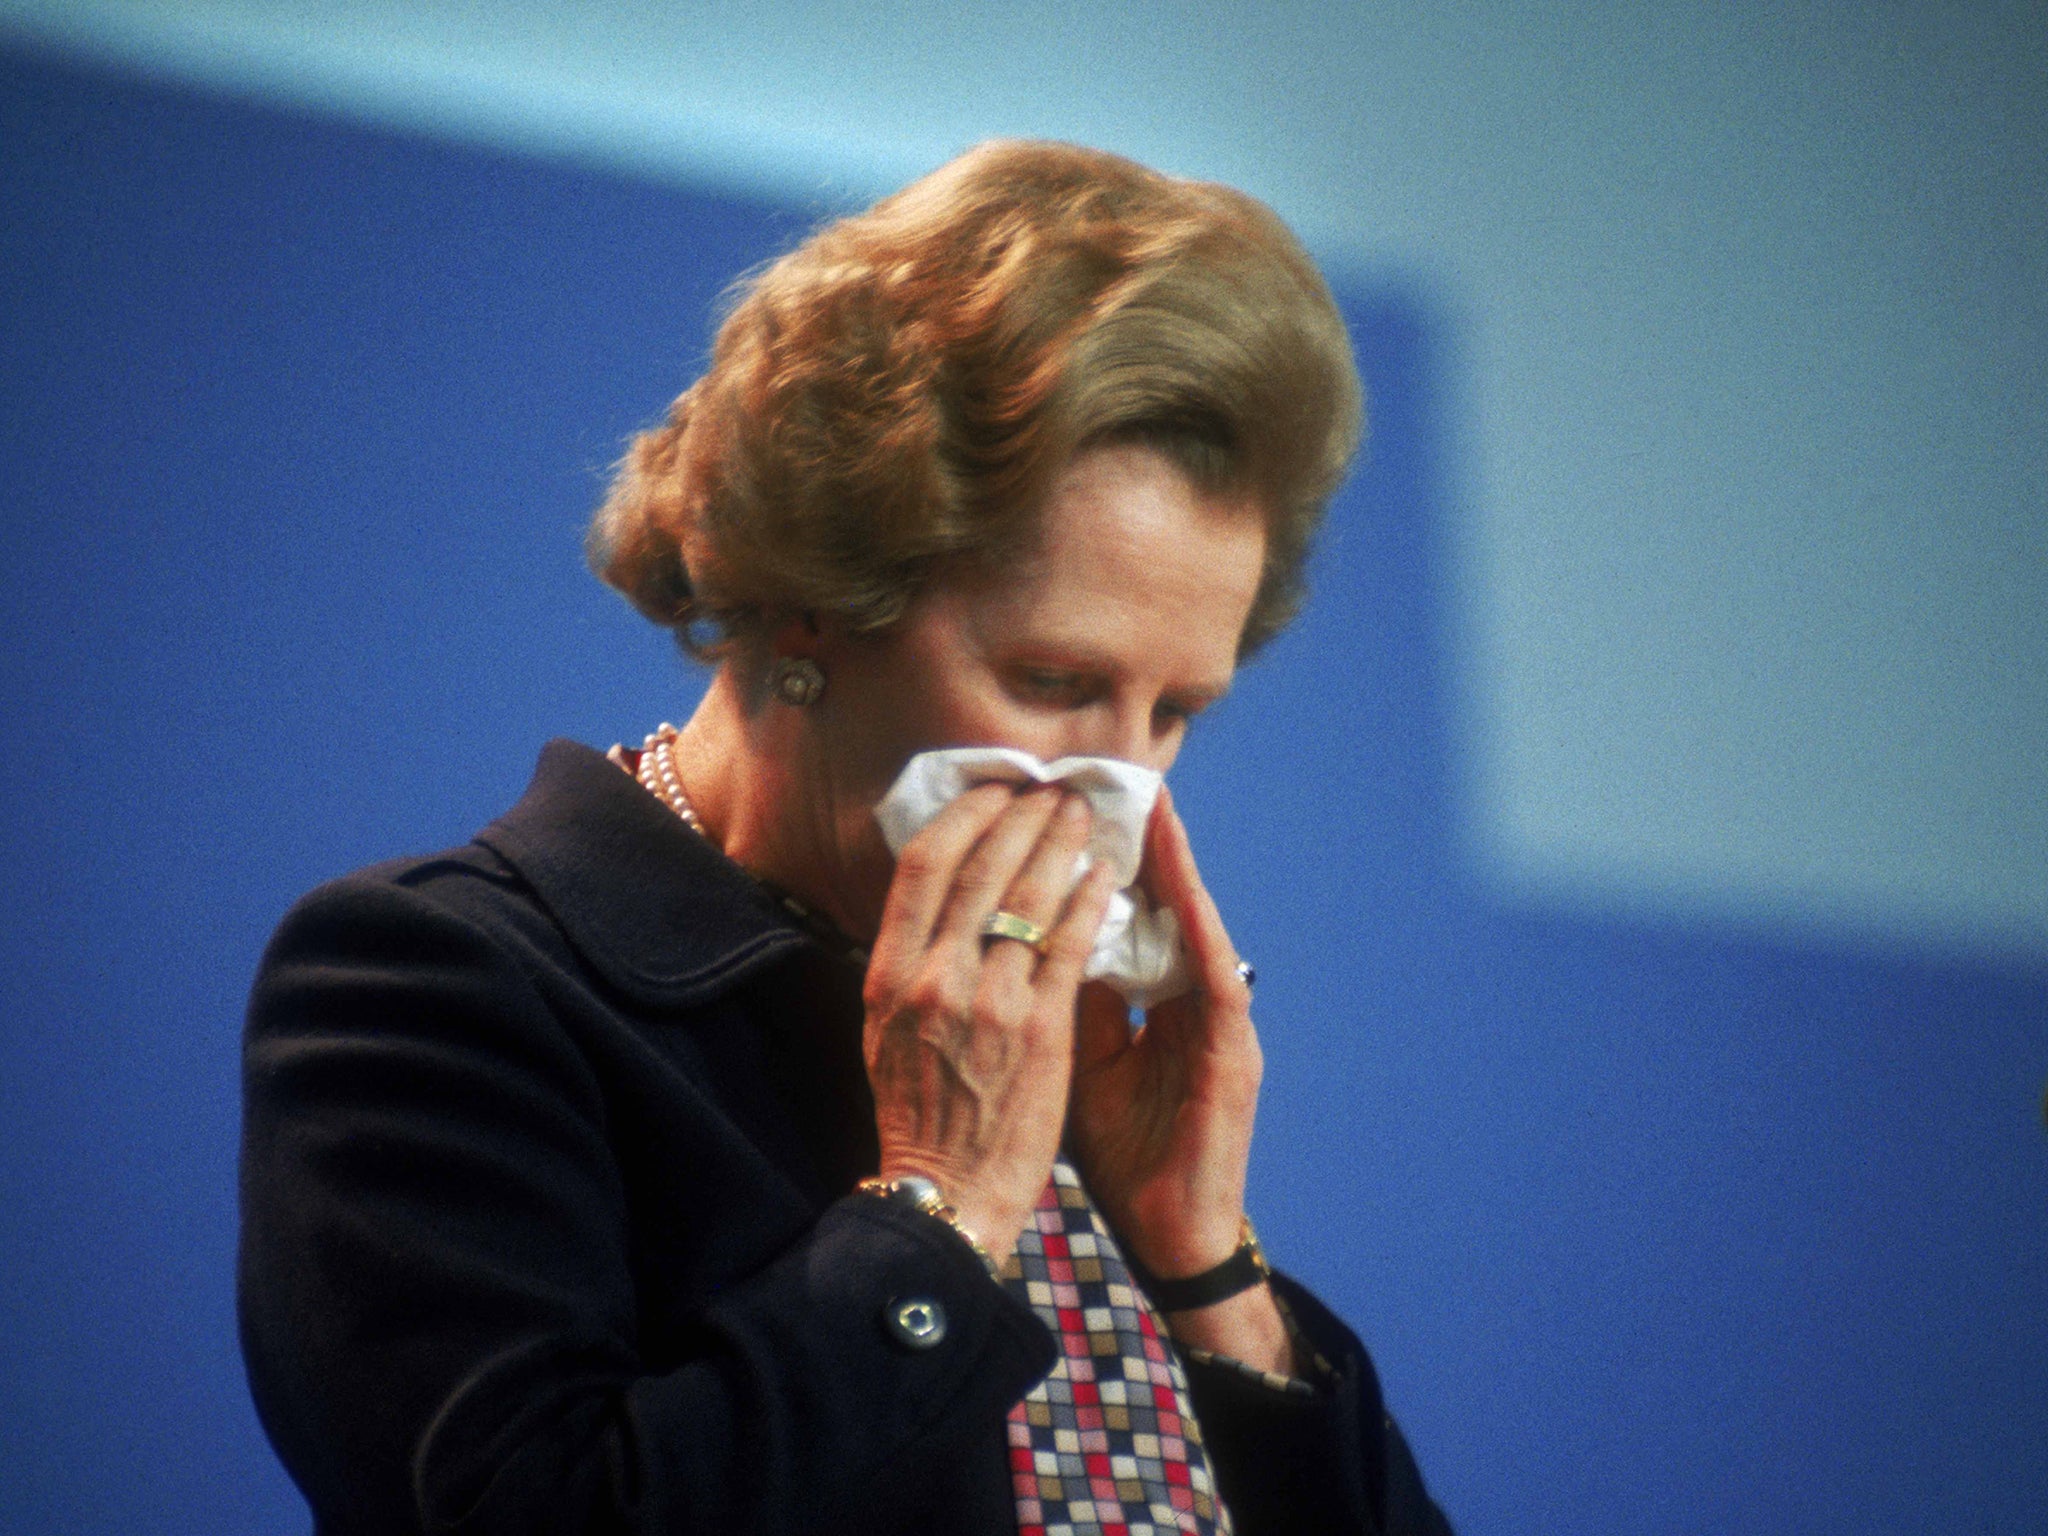 An emotional Margaret Thatcher at the 1984 Conservative Party Conference in Brighton on the day
after the IRA bombing of the Grand Hotel